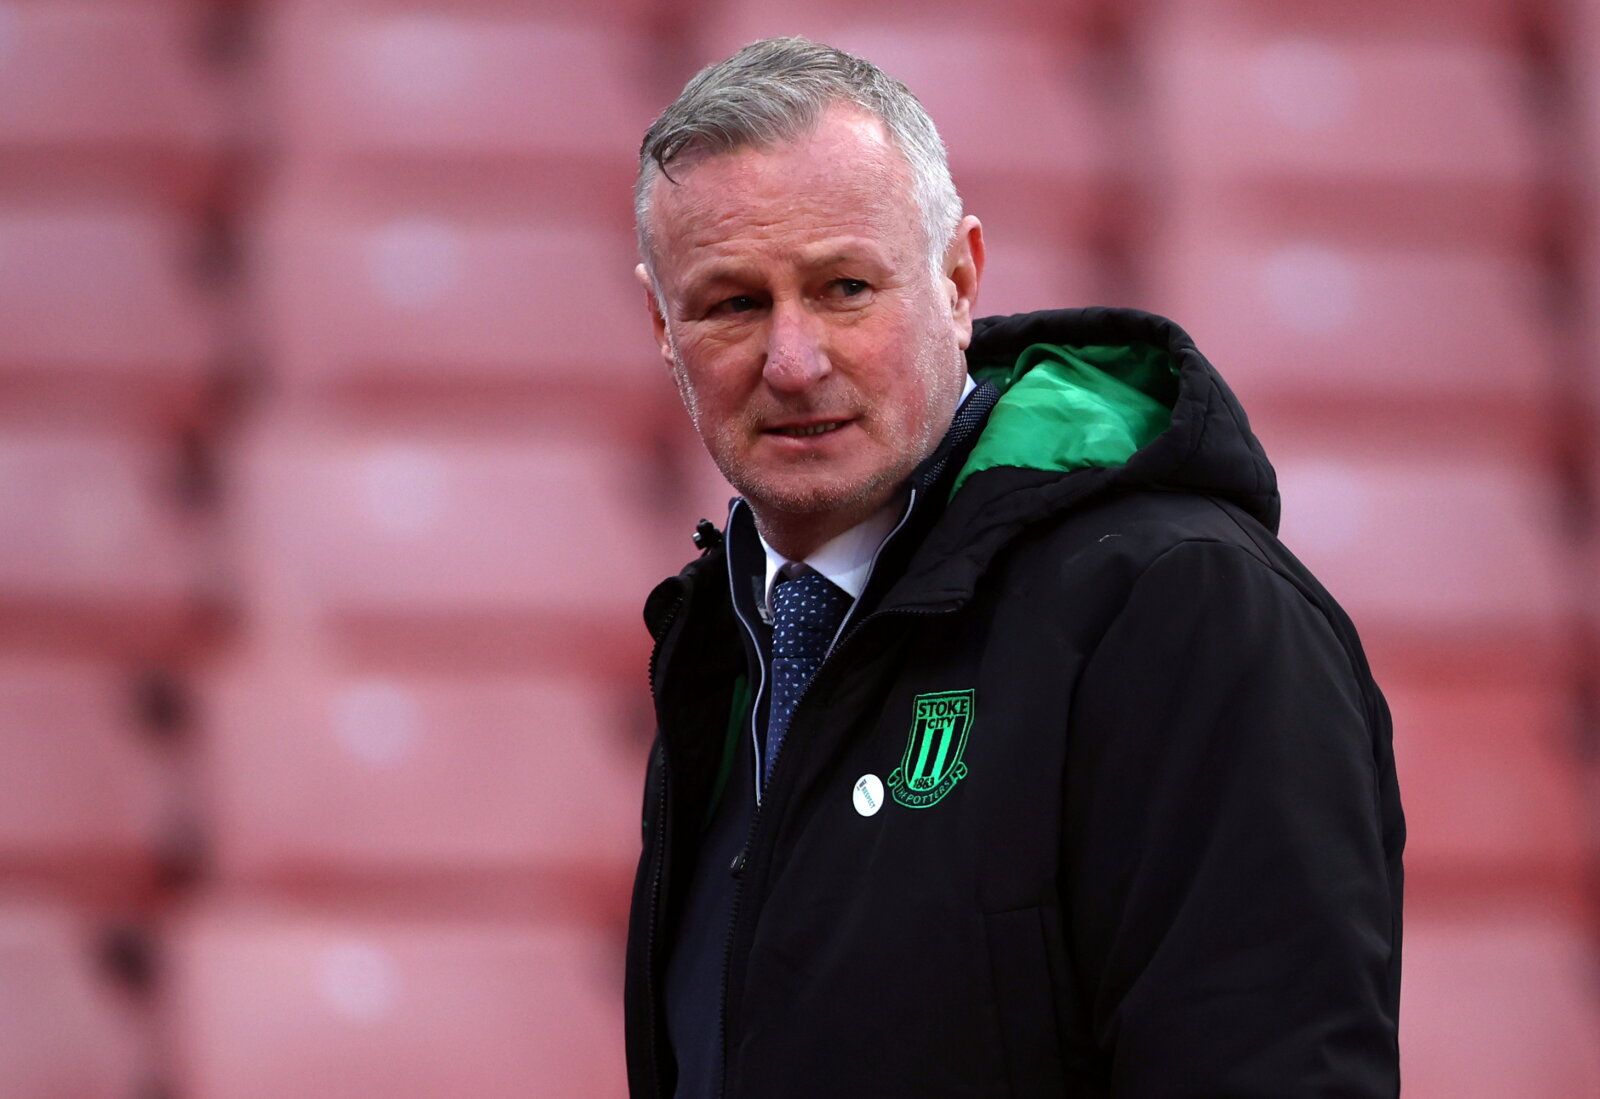 Soccer Football - FA Cup Third Round - Stoke City v Leyton Orient - bet365 Stadium, Stoke-on-Trent, Britain - January 9, 2022  Stoke City manager Michael O'Neill after the match   Action Images via Reuters/Molly Darlington